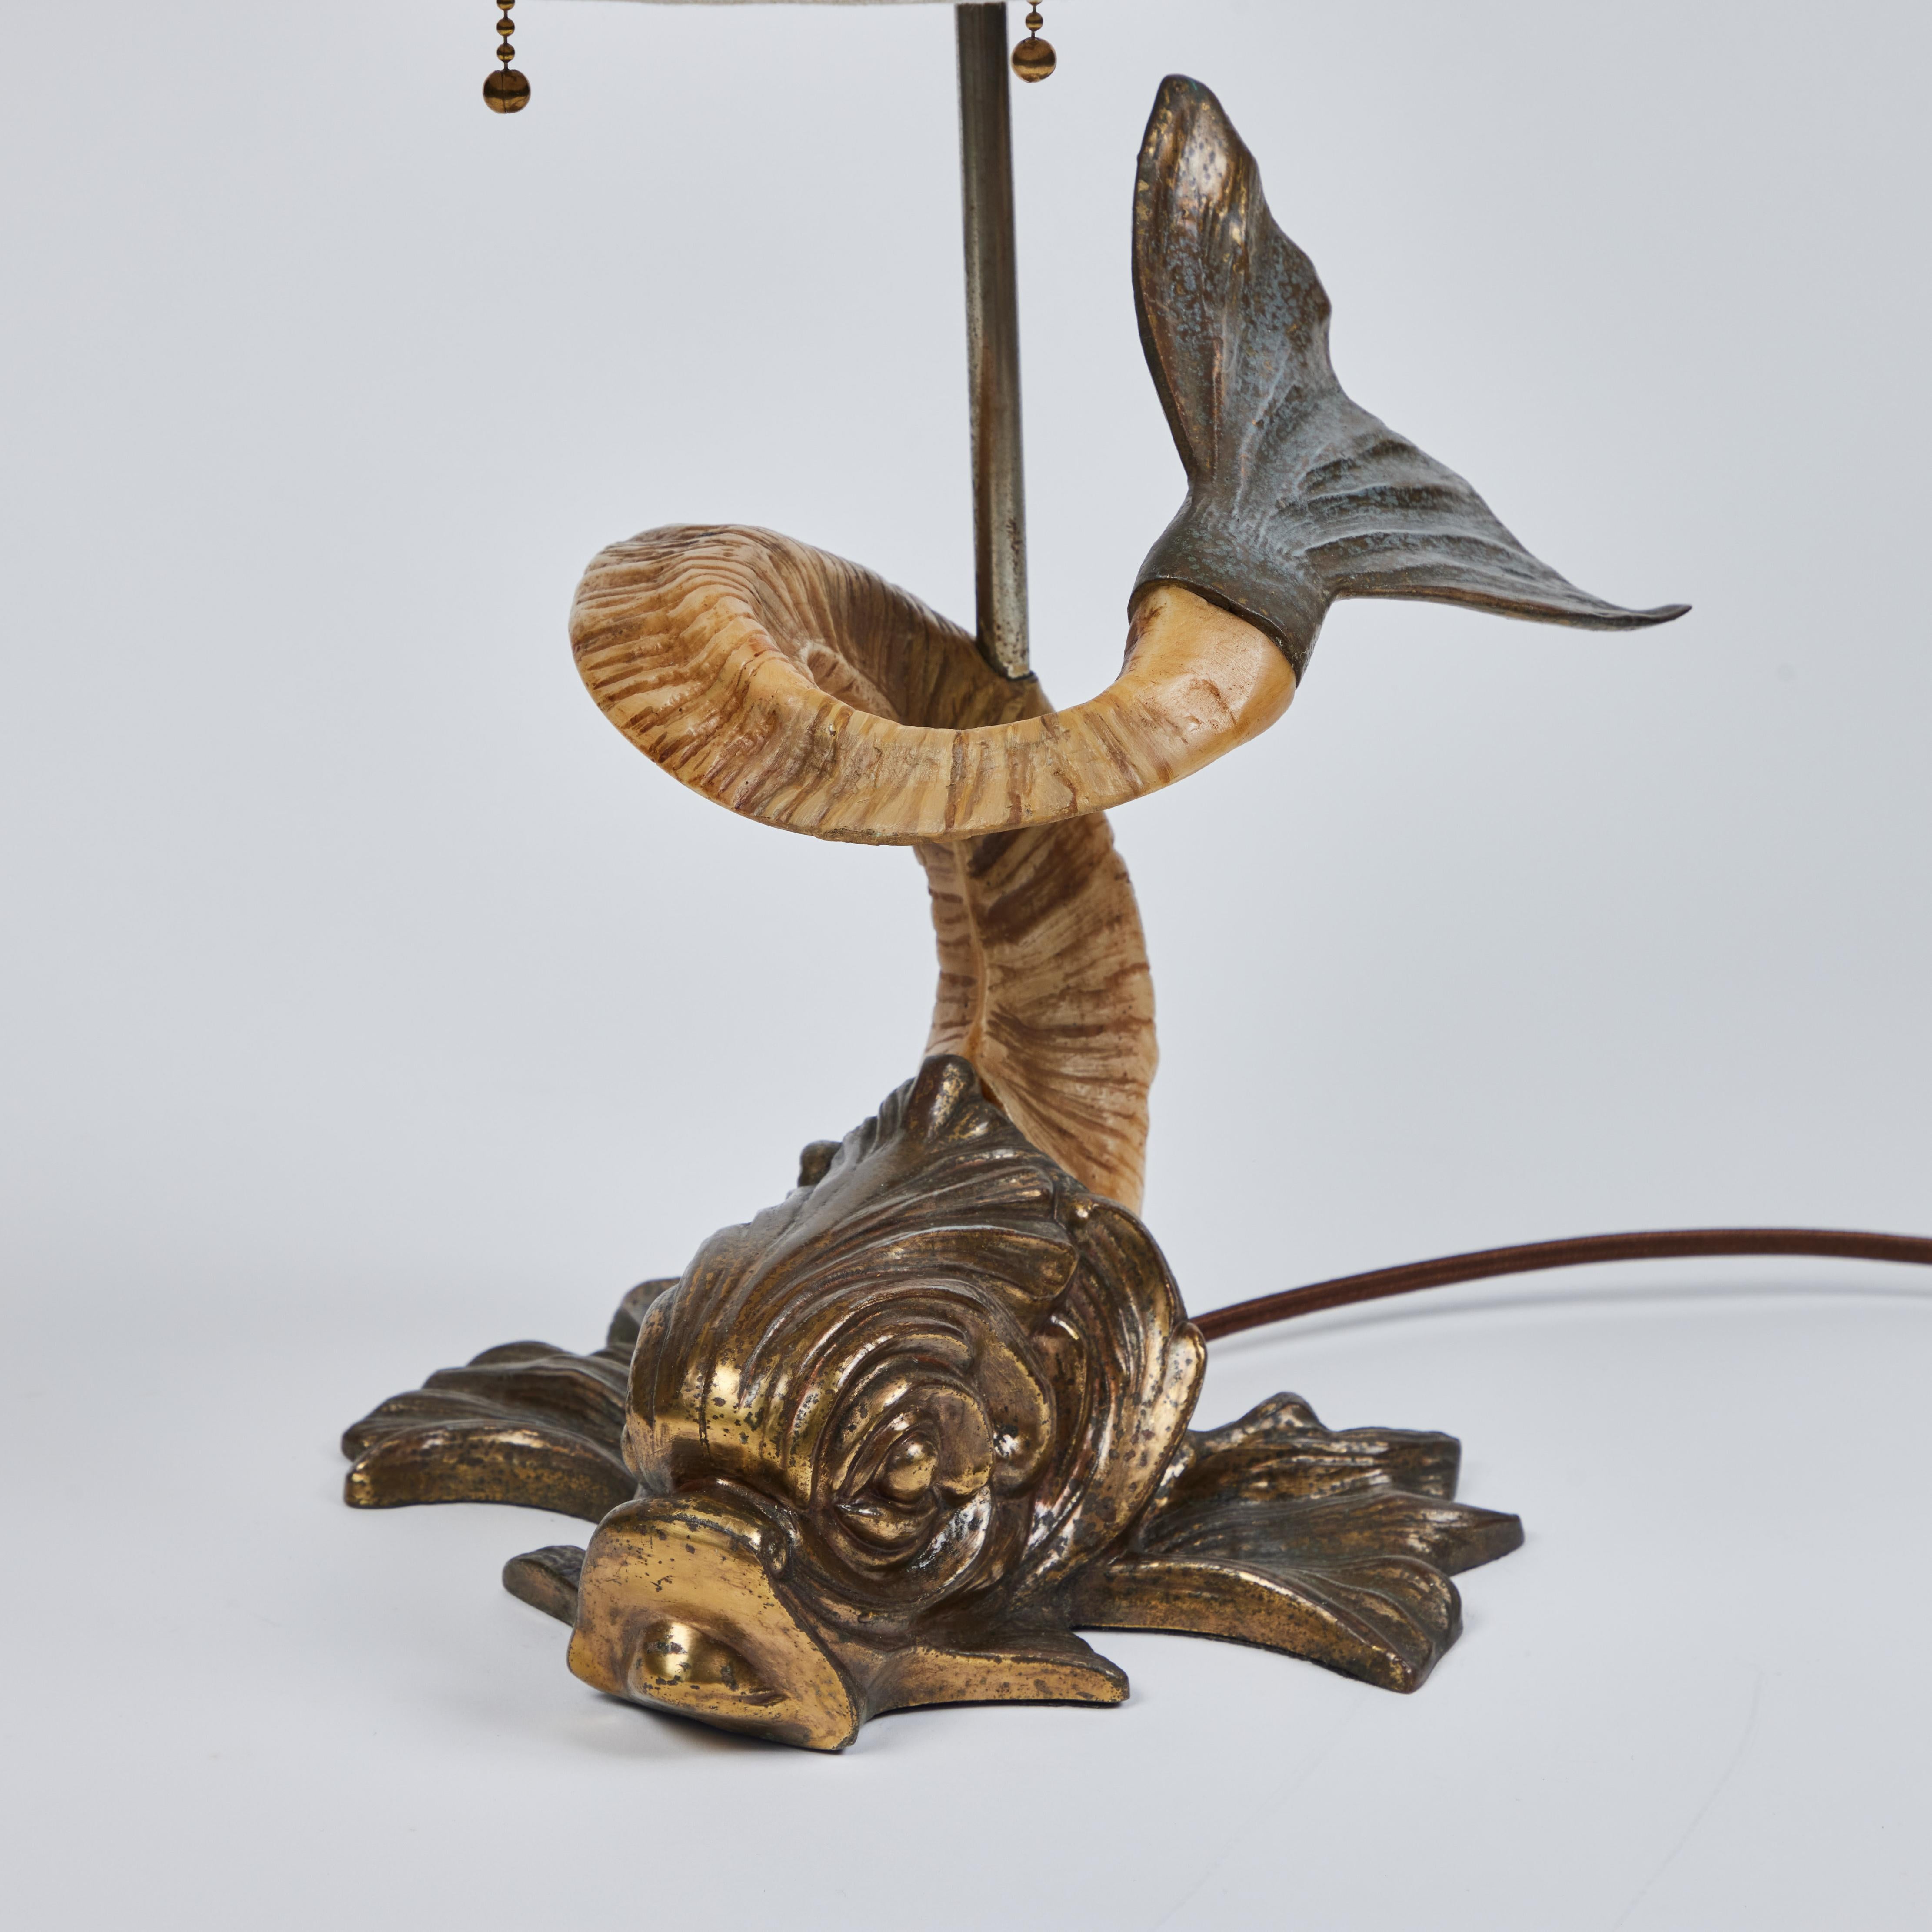 How fun is this Vintage Koi Fish Table Lamp? It represents a classic sculpted koi fish with a body made up of a curved carved resin ram's horn. The base (head), tail, lamp body and finial are metal with an antique brass finish. The lamp is topped